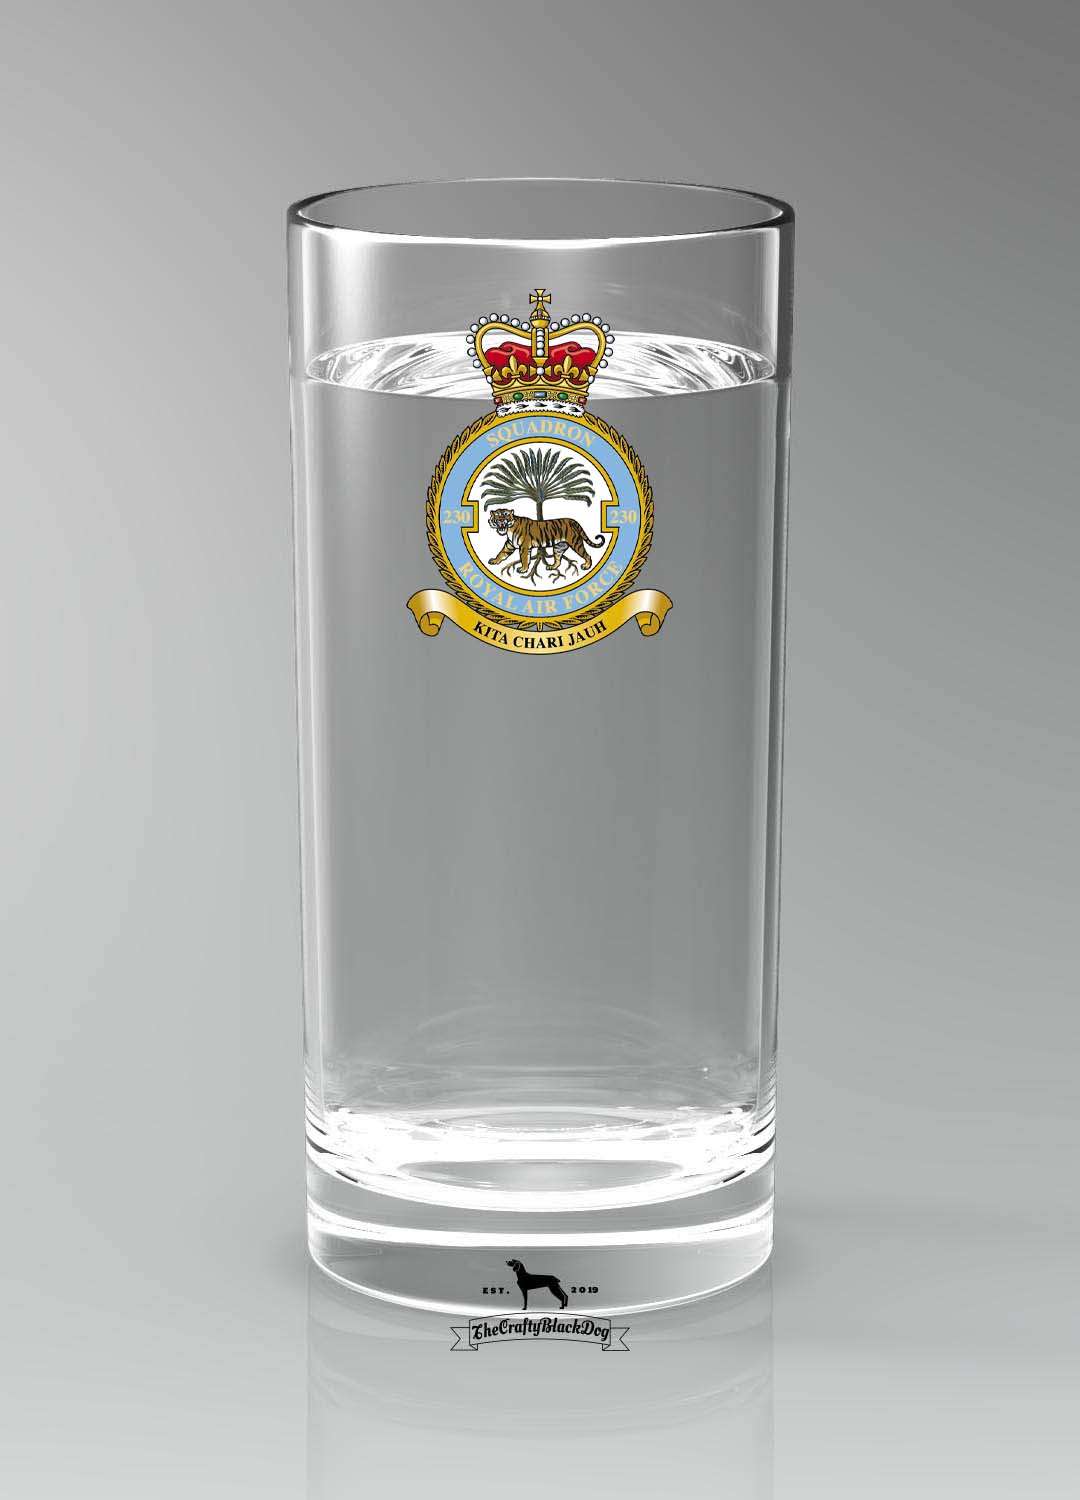 230 Squadron RAF - Straight Gin/Mixer/Water Glass